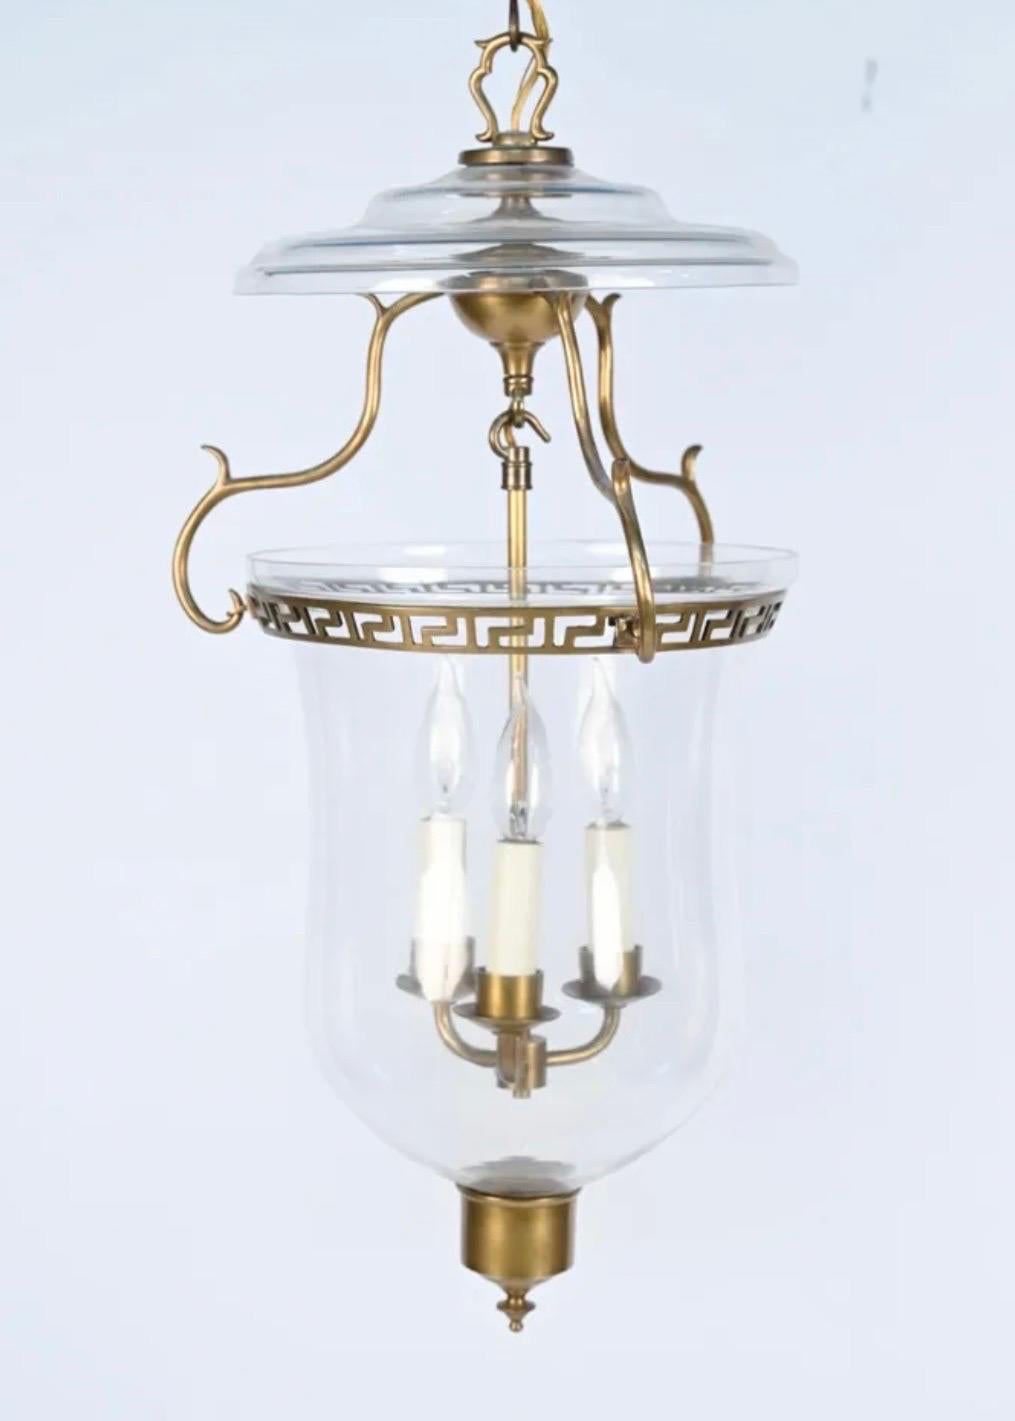 A Wonderful Pair Of Vaughan Bell Jar Glass & Brass Pendant Light Lantern Fixtures Each With A 3 Light Cluster, Accompanied By Chain And Canopy For Installation. 